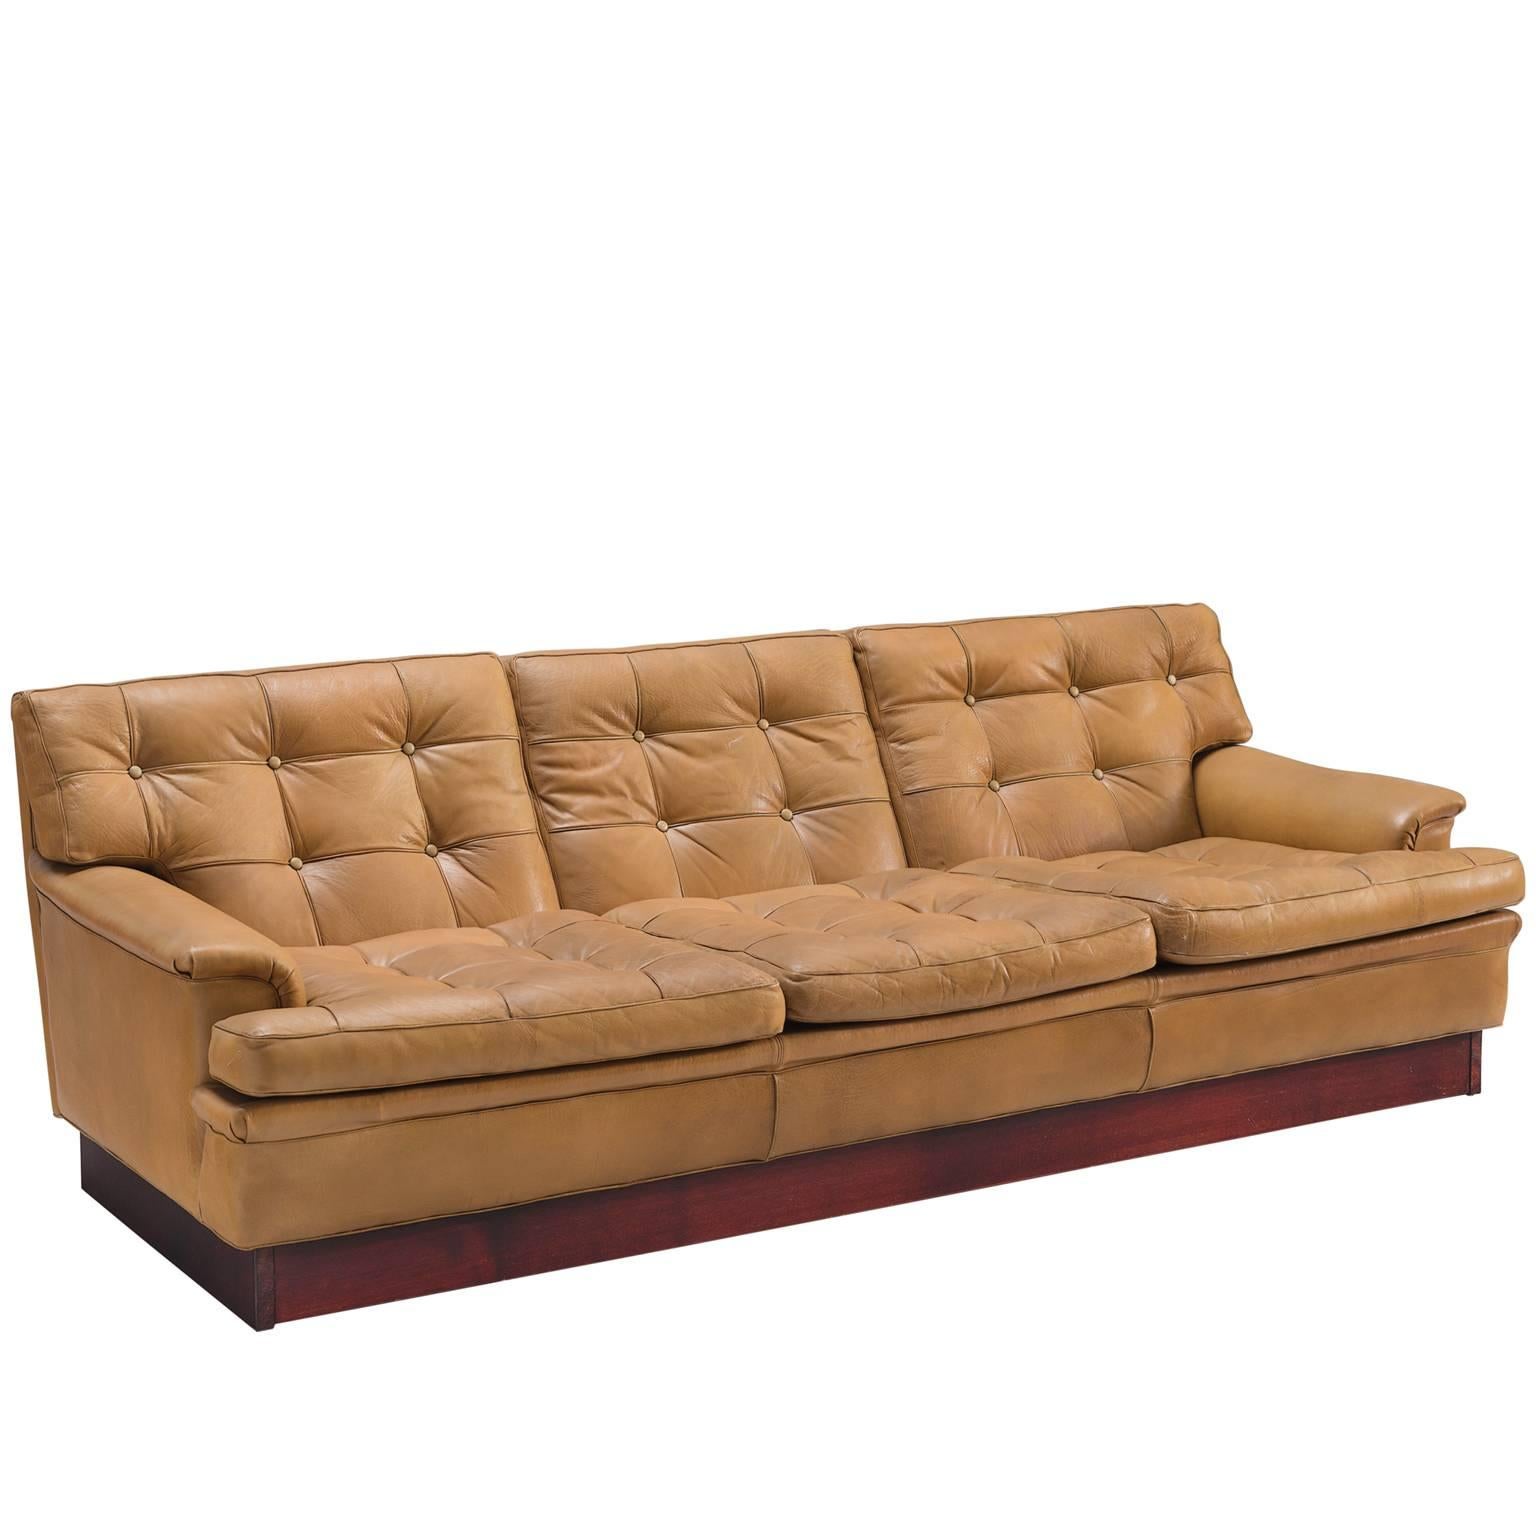 Arne Norell Tufted Cognac Leather Sofa